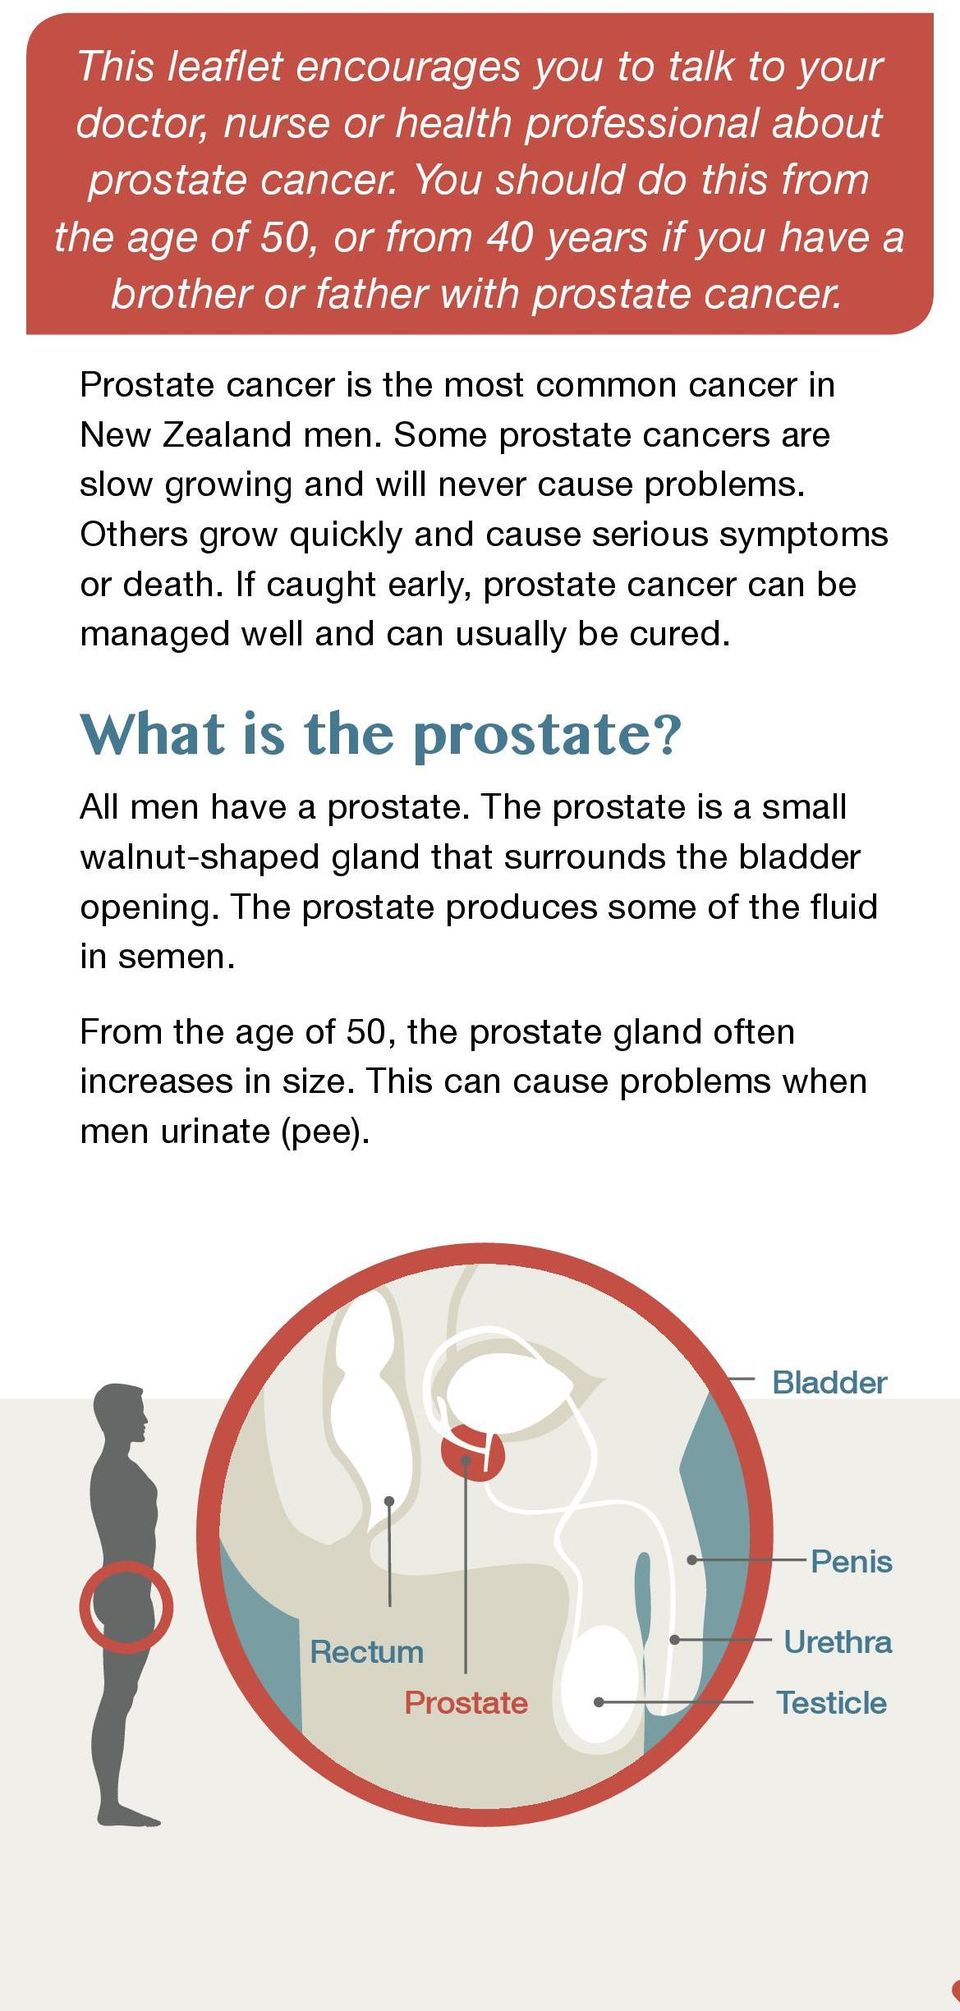 Others grow quickly and cause serious symptoms or death. If caught early, prostate cancer can be managed well and can usually be cured. What is the prostate?